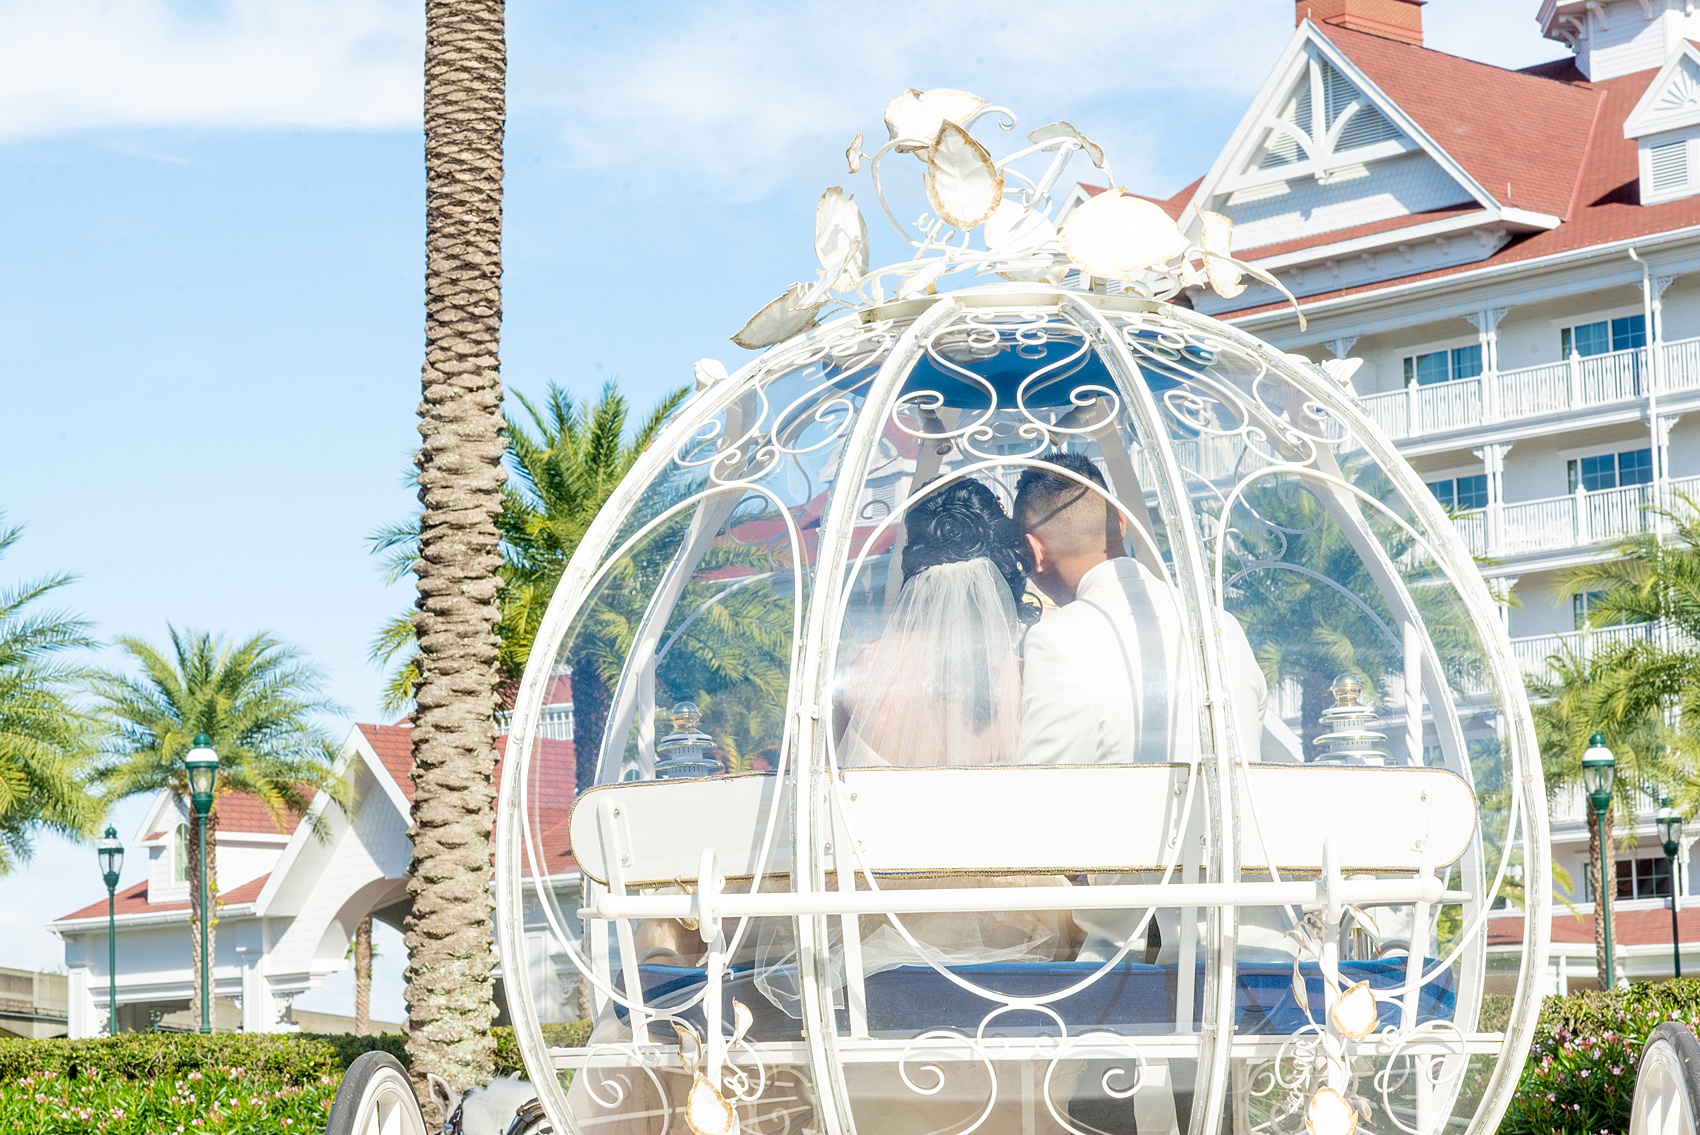 Walt Disney World photographs by Mikkel Paige Photography. The bride and groom celebrated to their ceremony in style in Cinderella’s Glass Coach with white ponies. They took pictures at the Grand Floridian Resort and Wedding Pavilion with this awesome transportation. #disneywedding #disneybride #waltdisneyworld #DisneyWorldWedding #CinderellaCarriage #GlassCoach